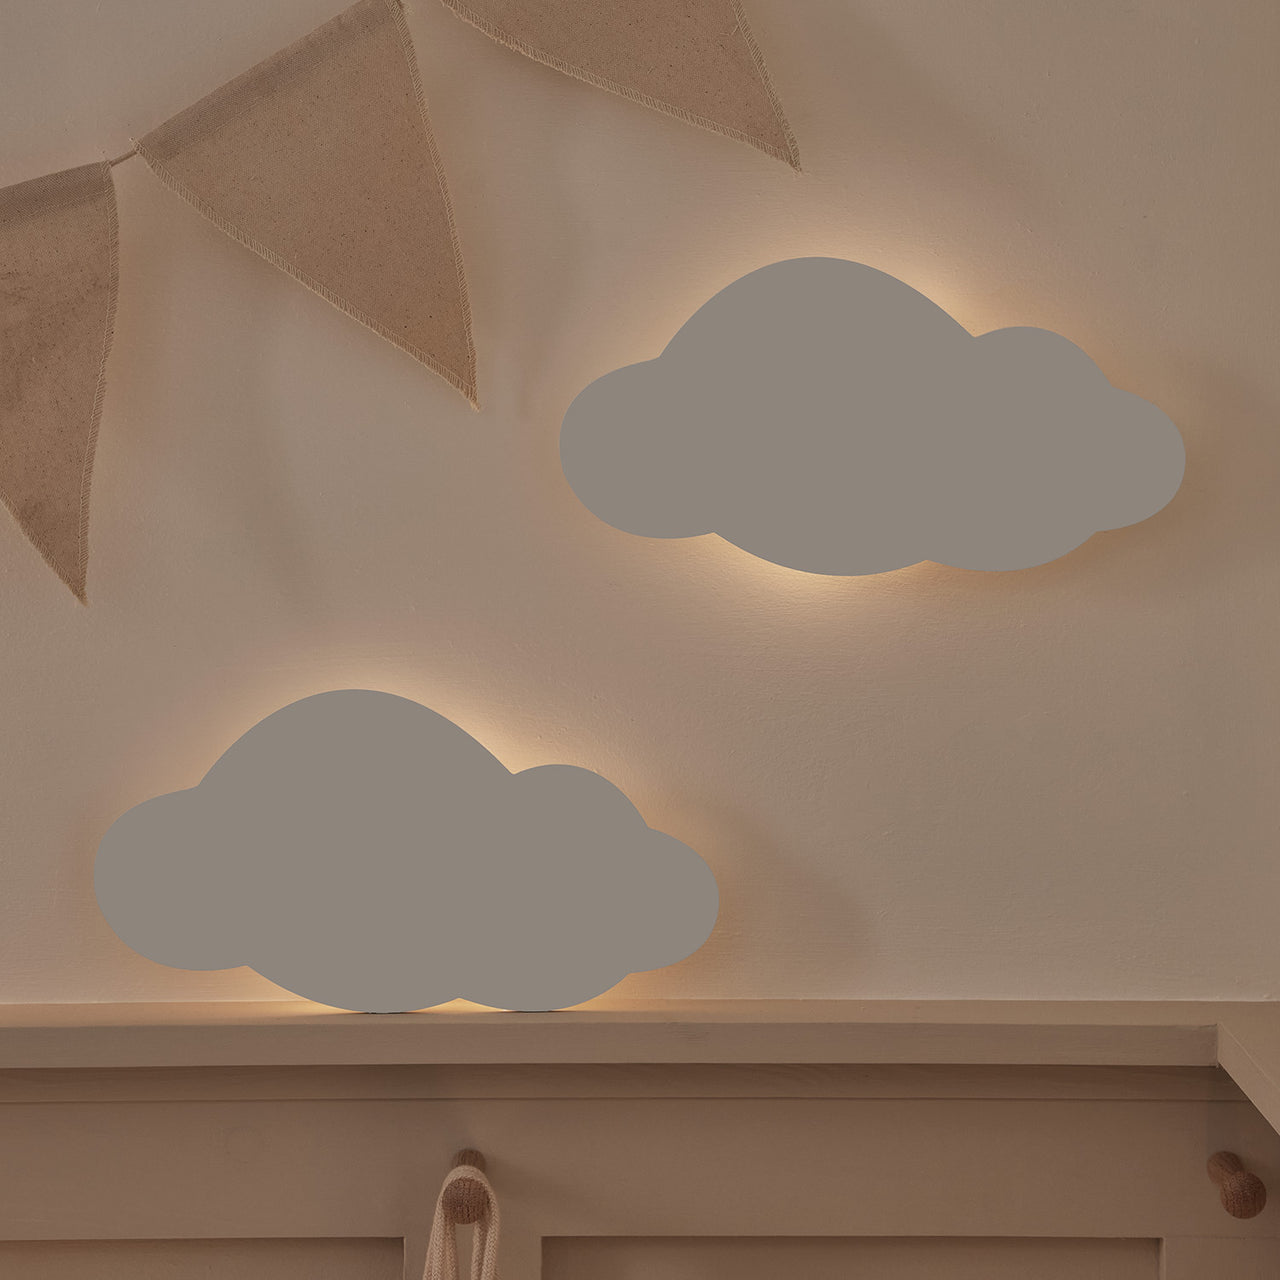 2 Rechargeable Cloud Night Lights